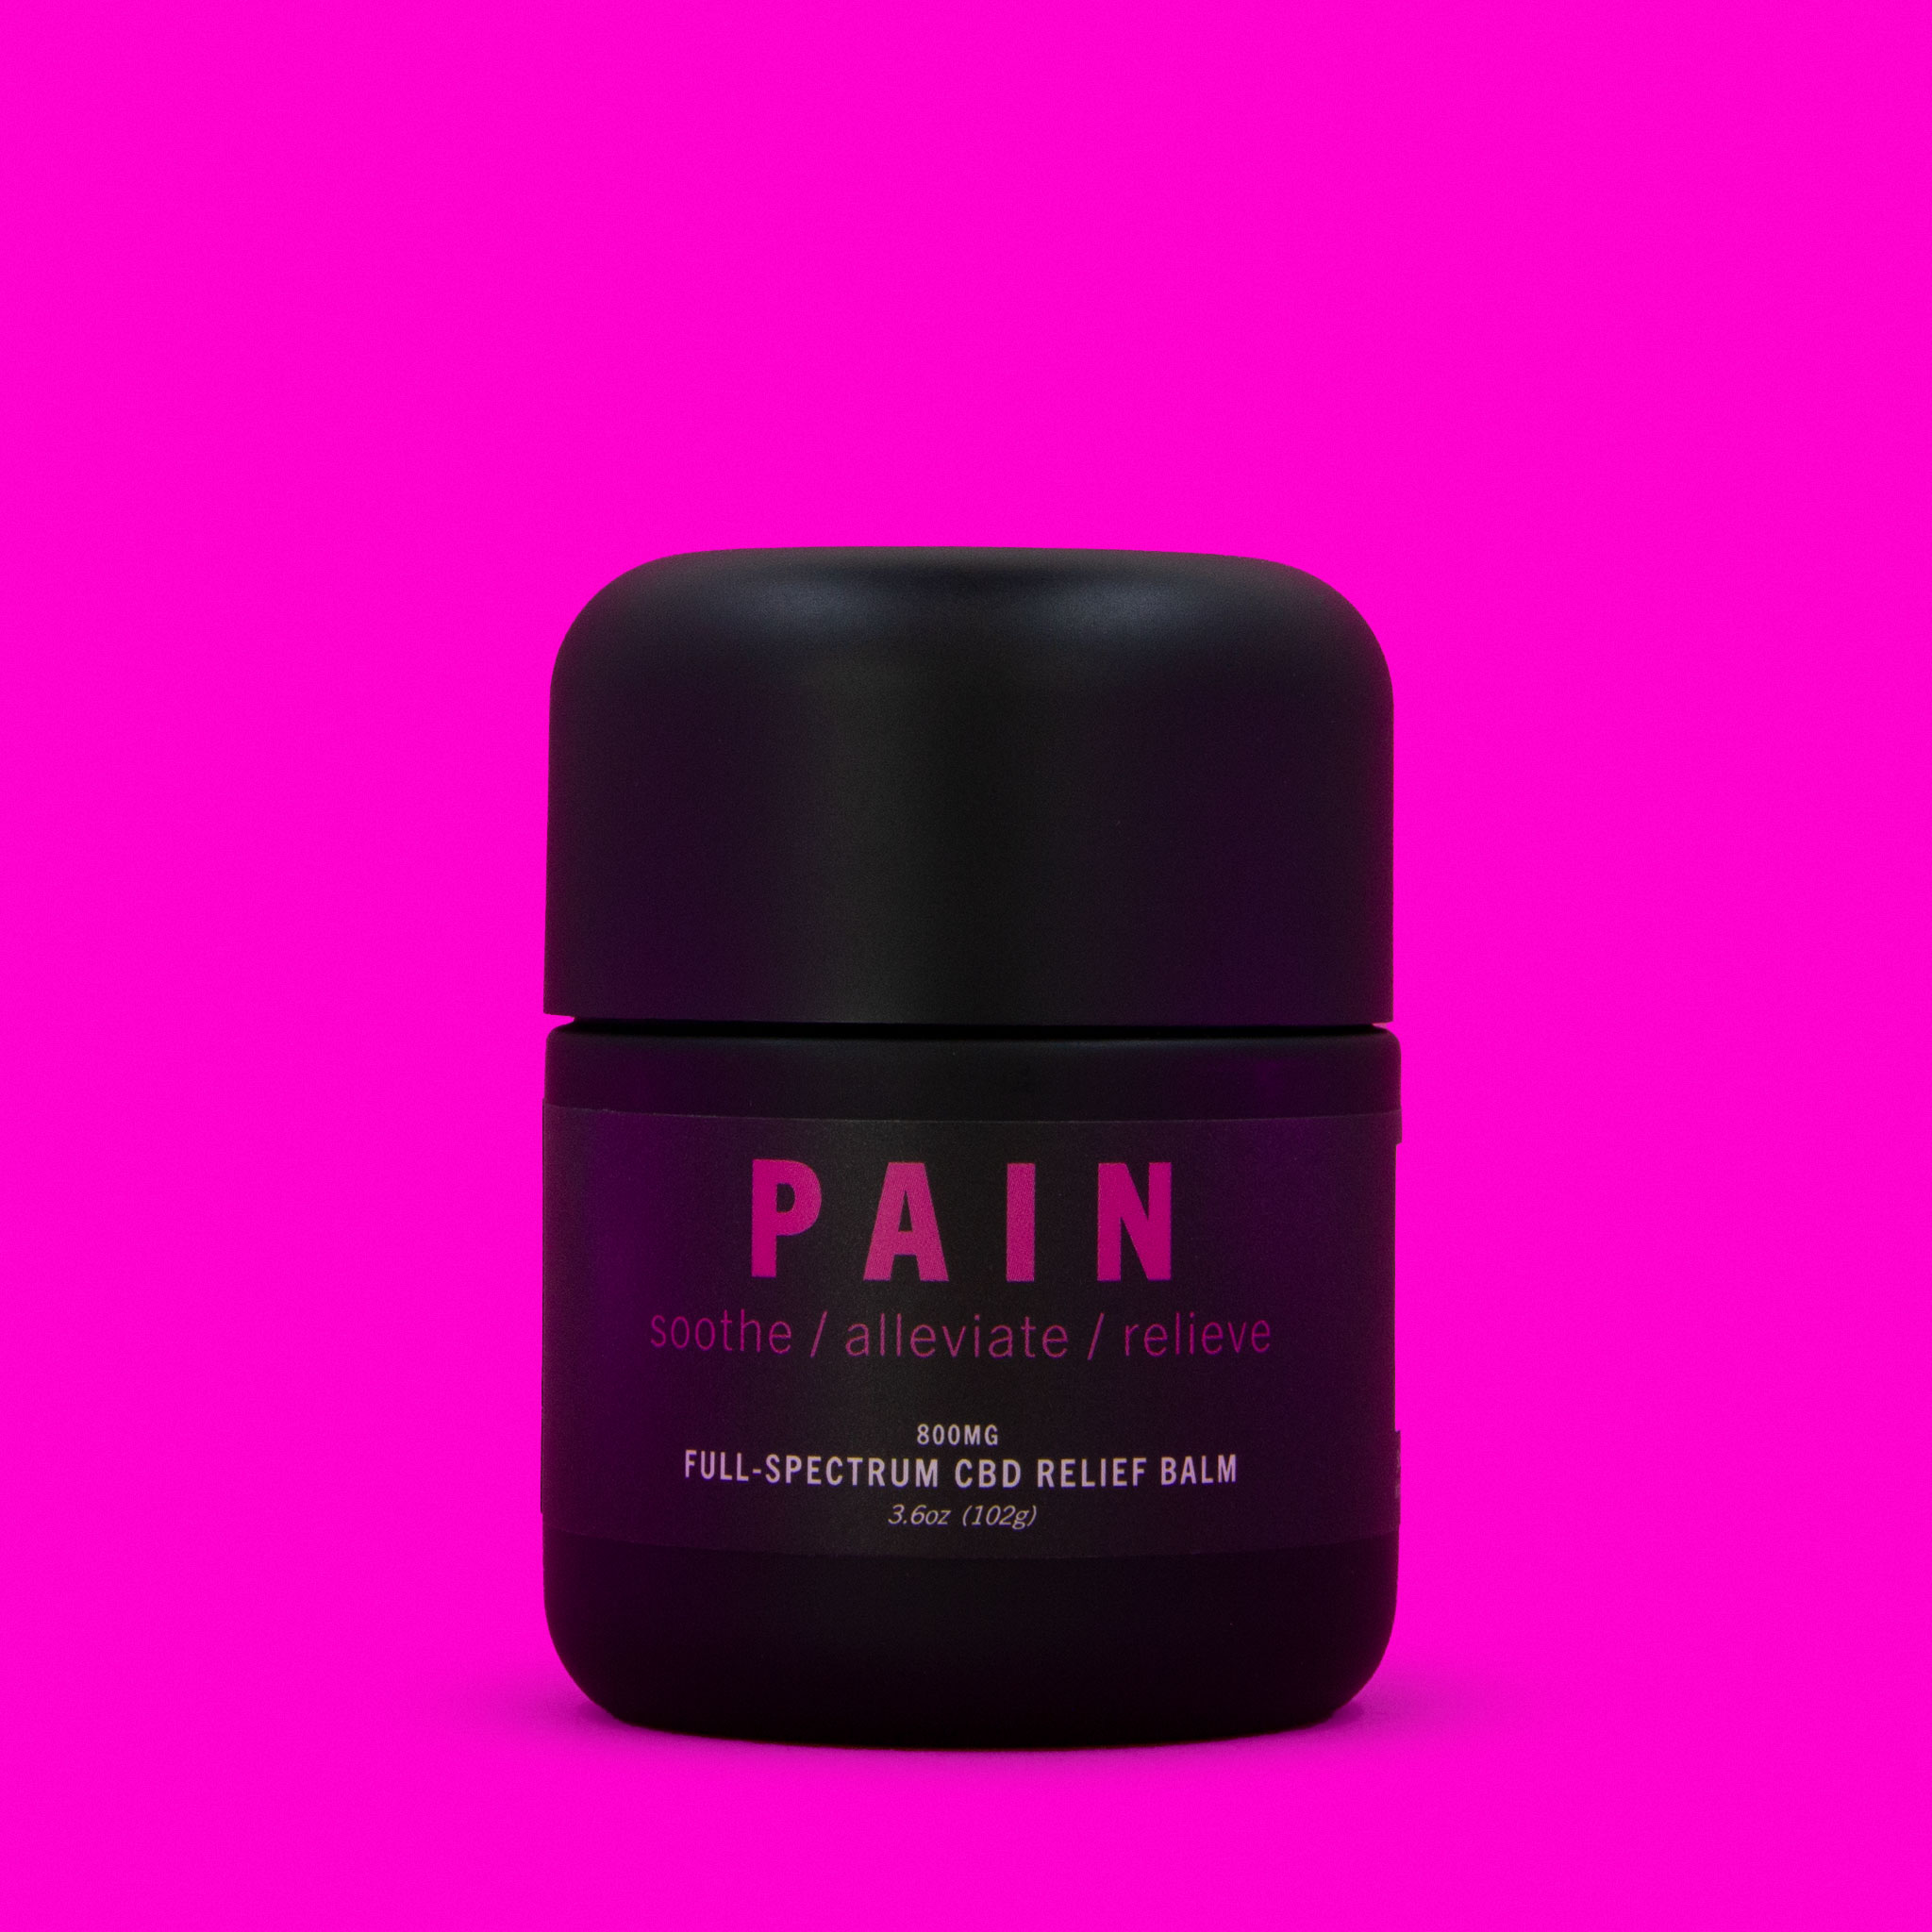 pain balm tub on pink background